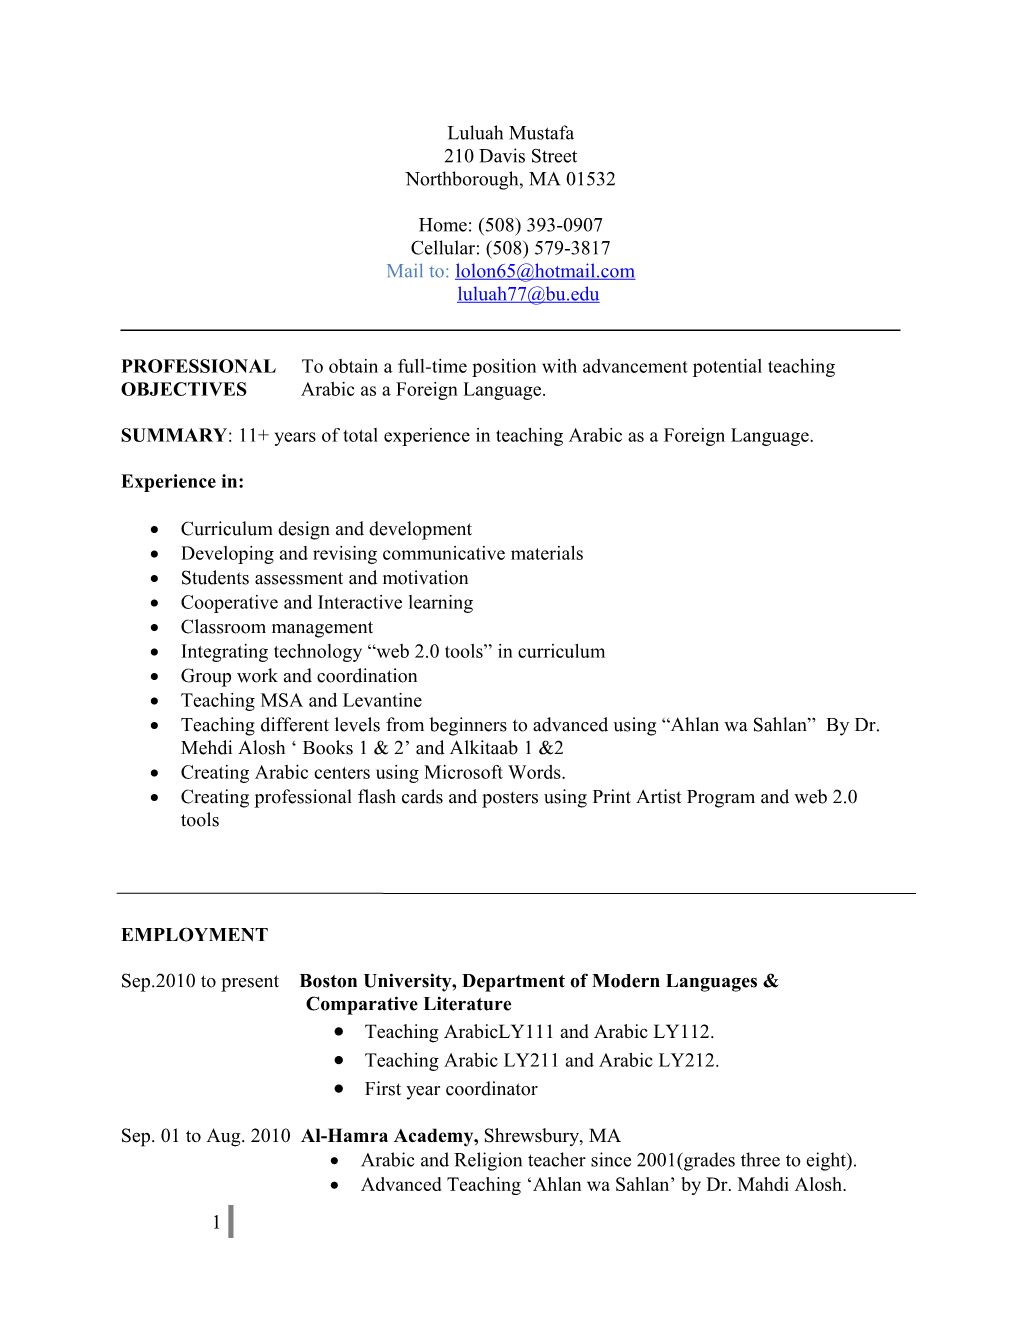 PROFESSIONAL to Obtain a Full-Time Position with Advancement Potential Teaching